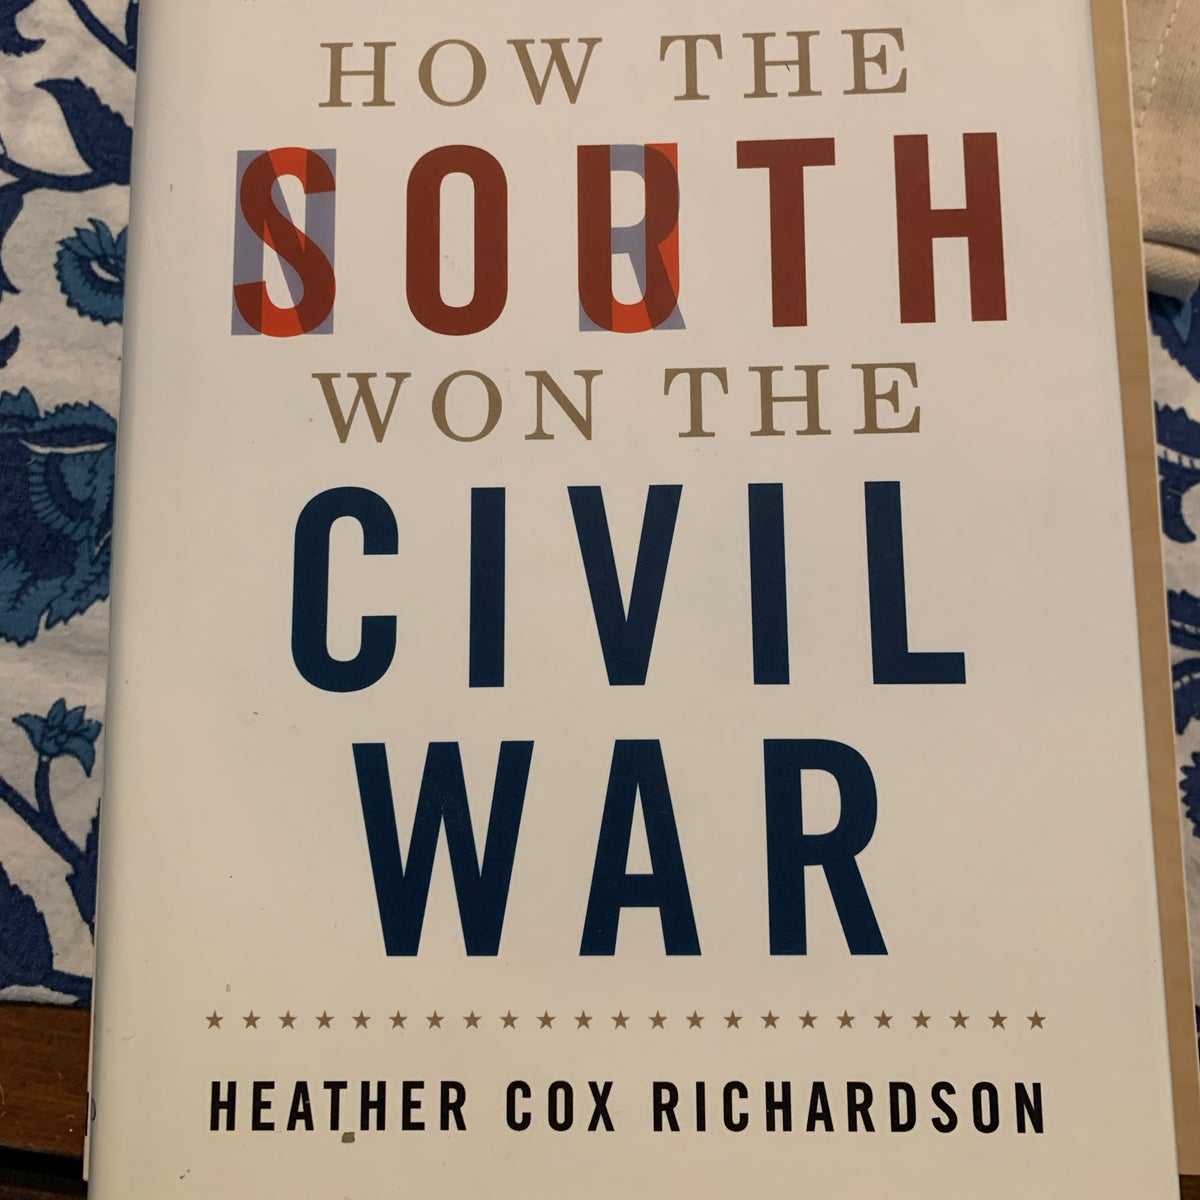 How the South Won the Civil War: Oligarchy, Democracy, and the Continuing  Fight for the Soul of America: Richardson, Heather Cox: 9780190900908:  : Books